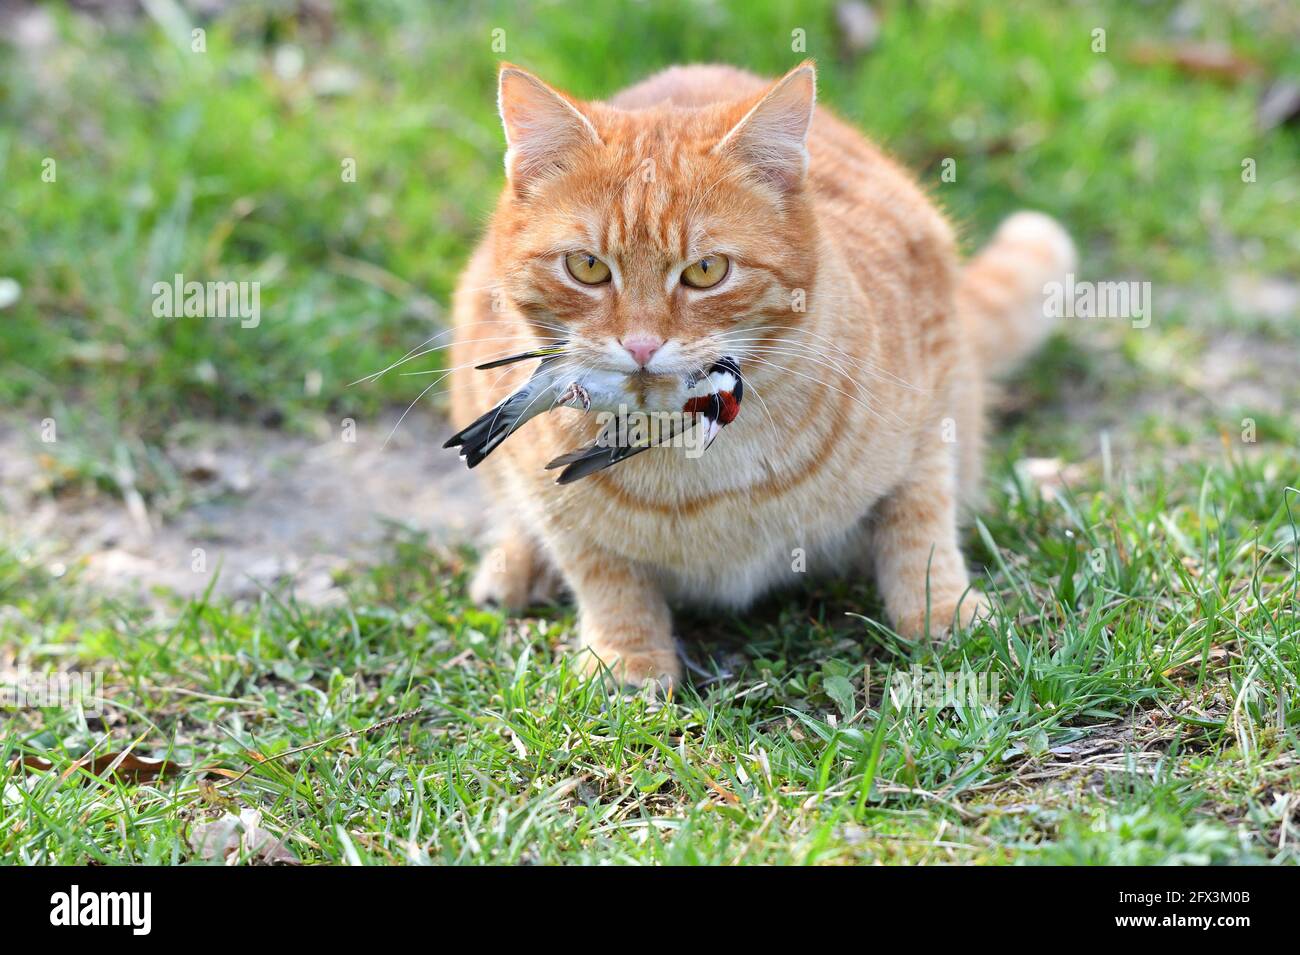 The domestic red cat caught the bird and holds it in its mouth Stock Photo